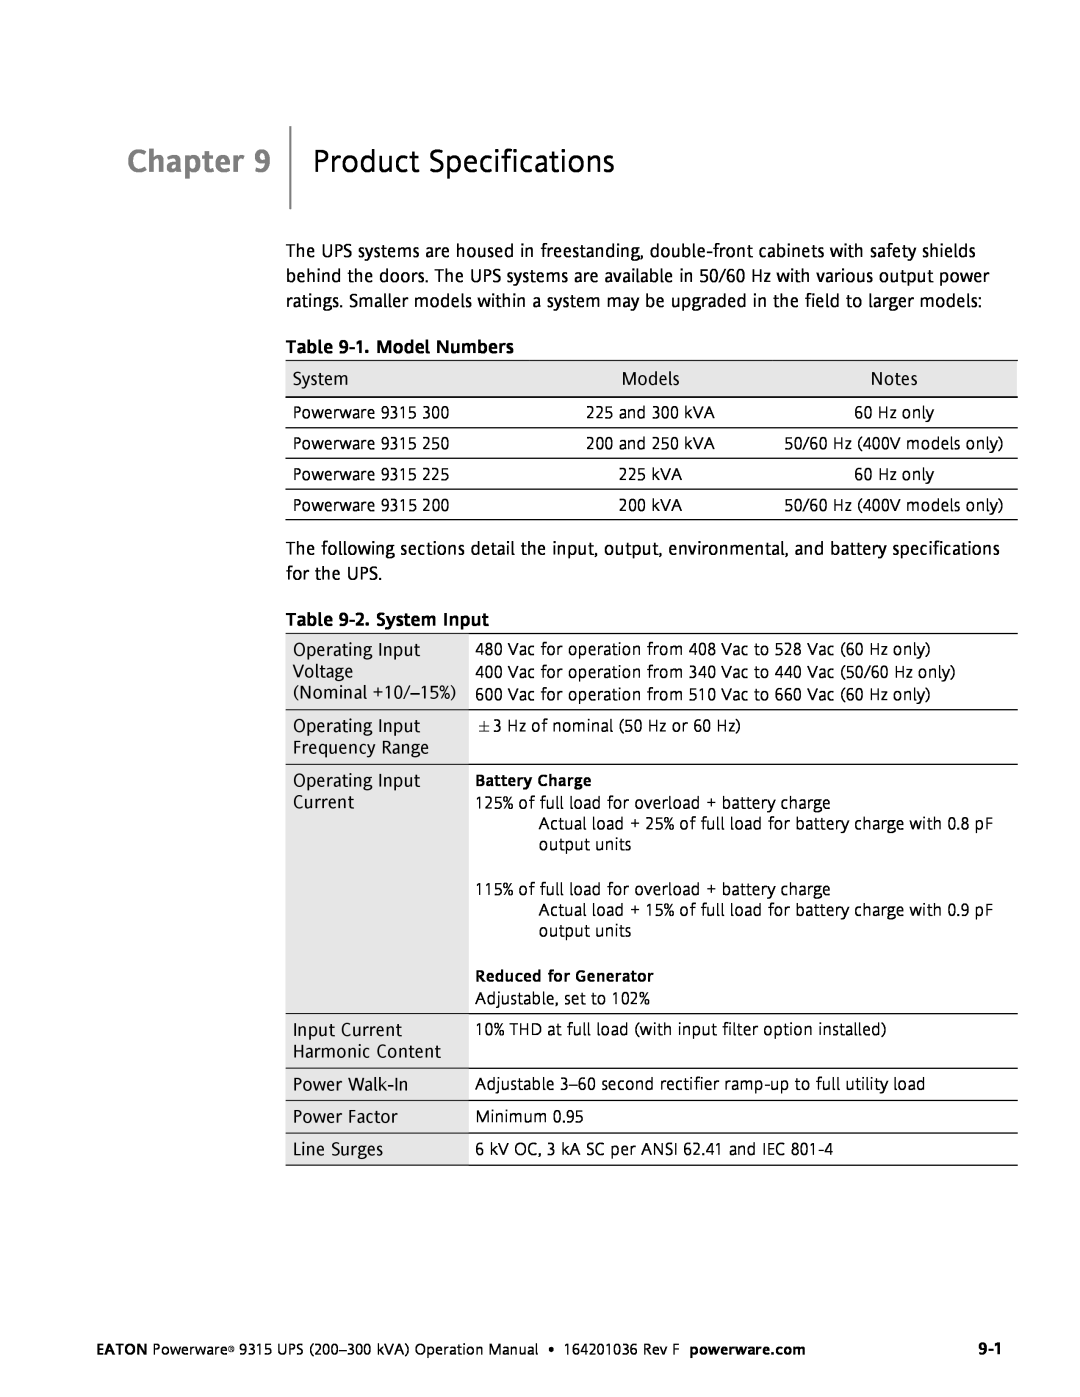 Eaton Electrical Powerware 9315 operation manual Product Specifications, Chapter, 1. Model Numbers, 2. System Input 